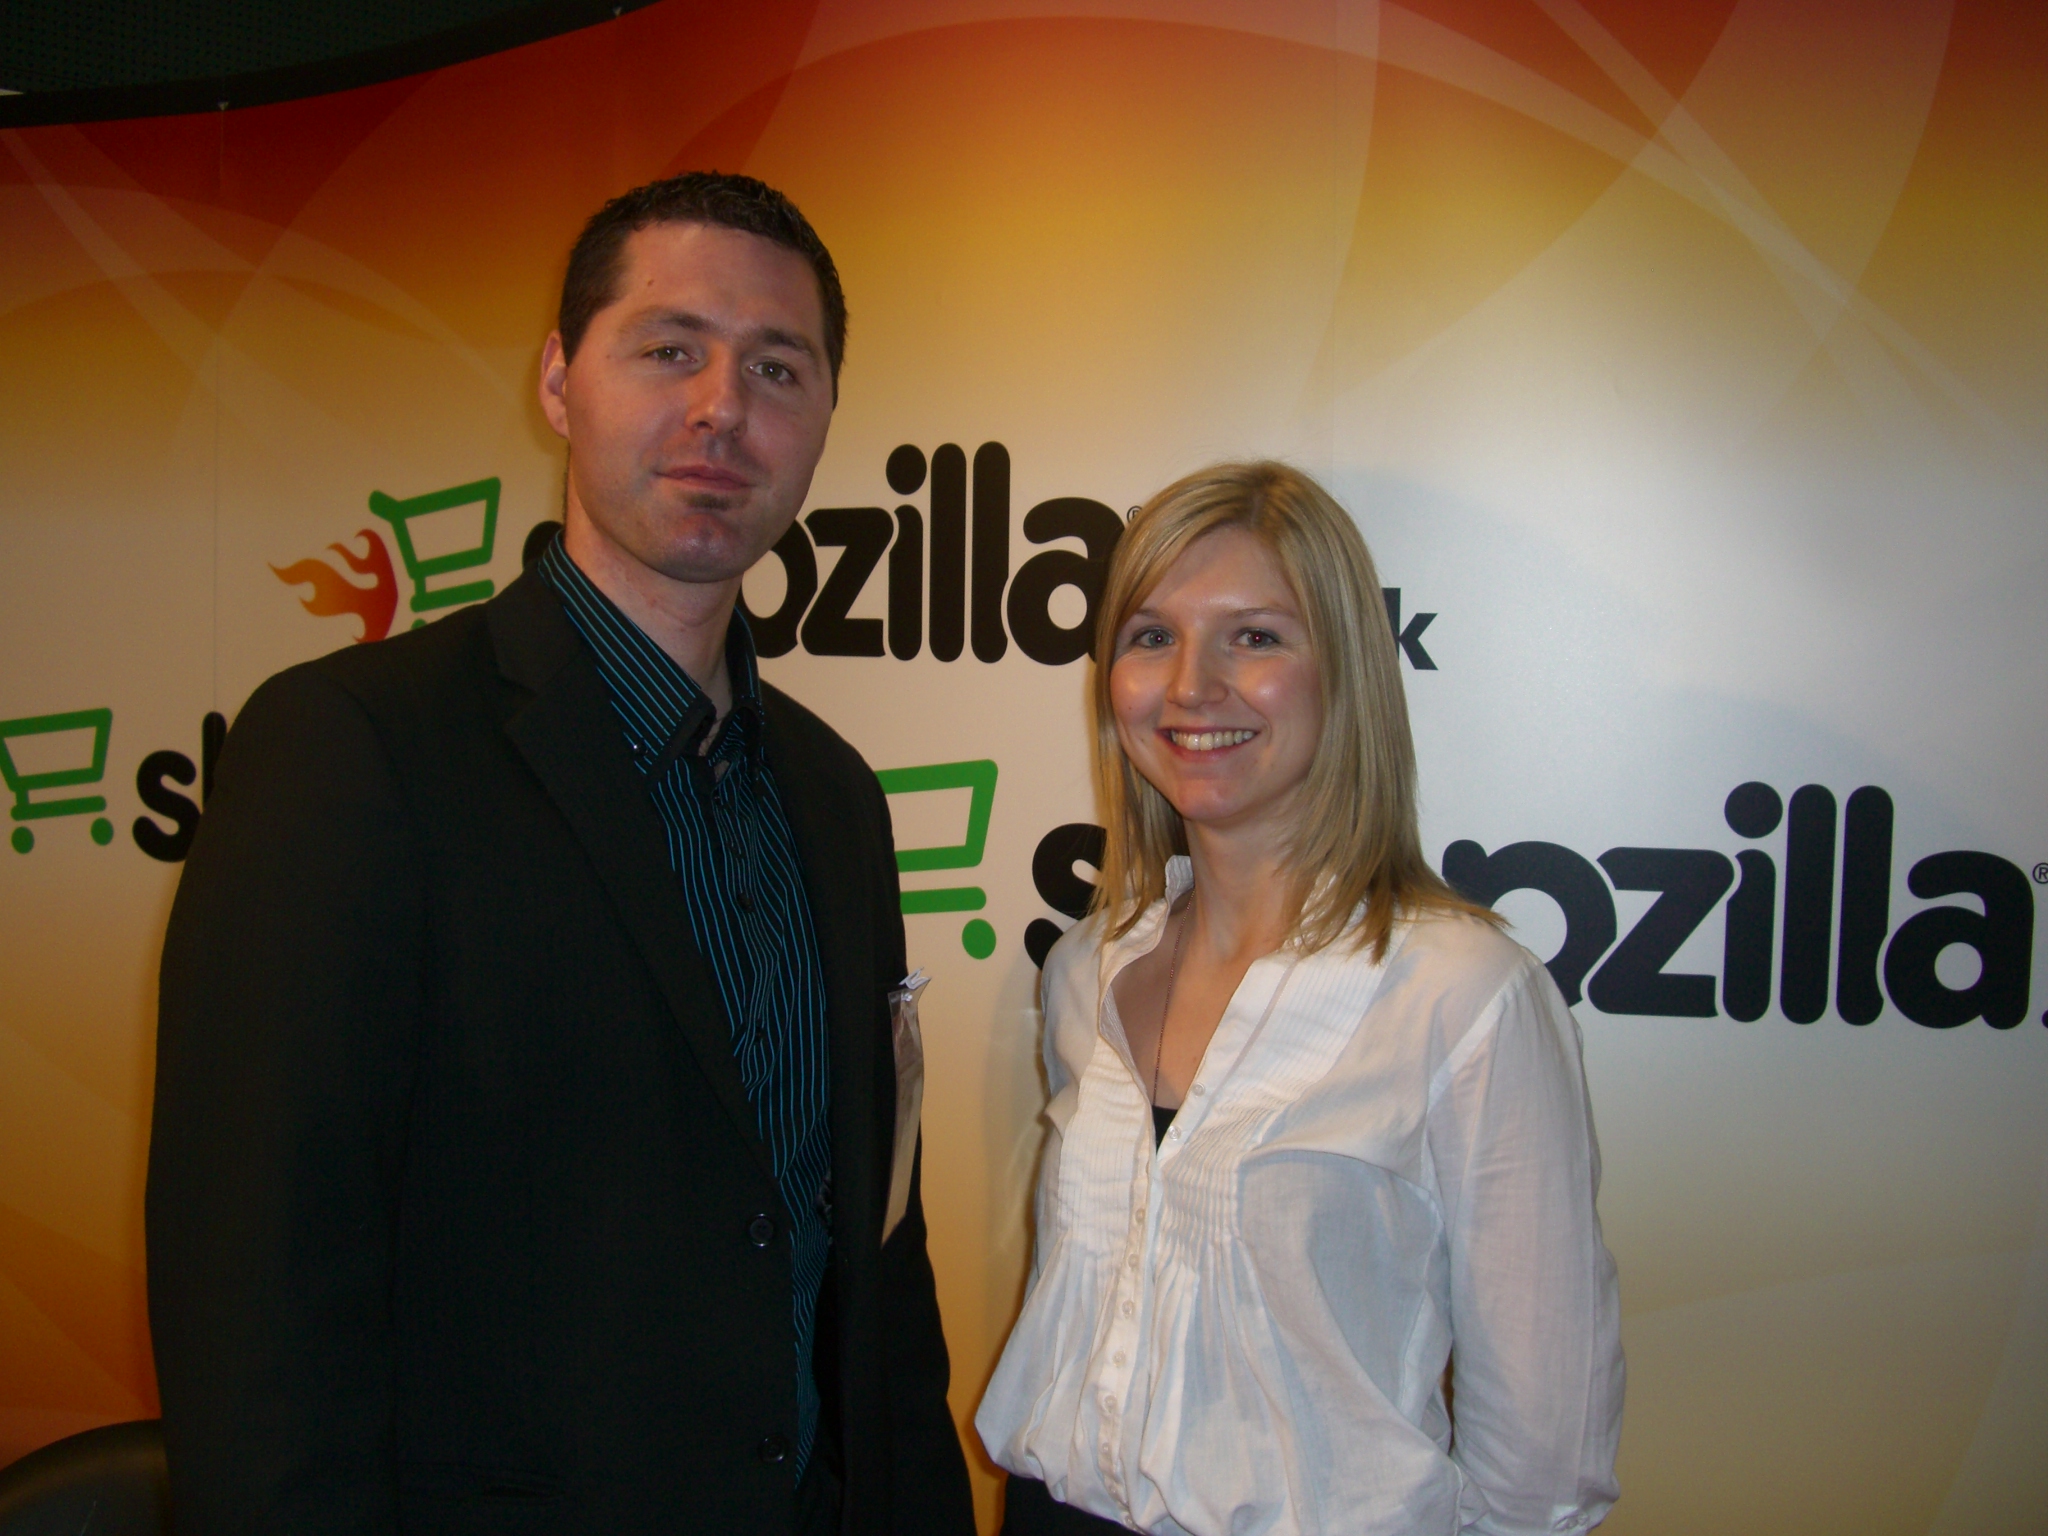 Emma and Yohan from the Shopzilla UK Publisher Team